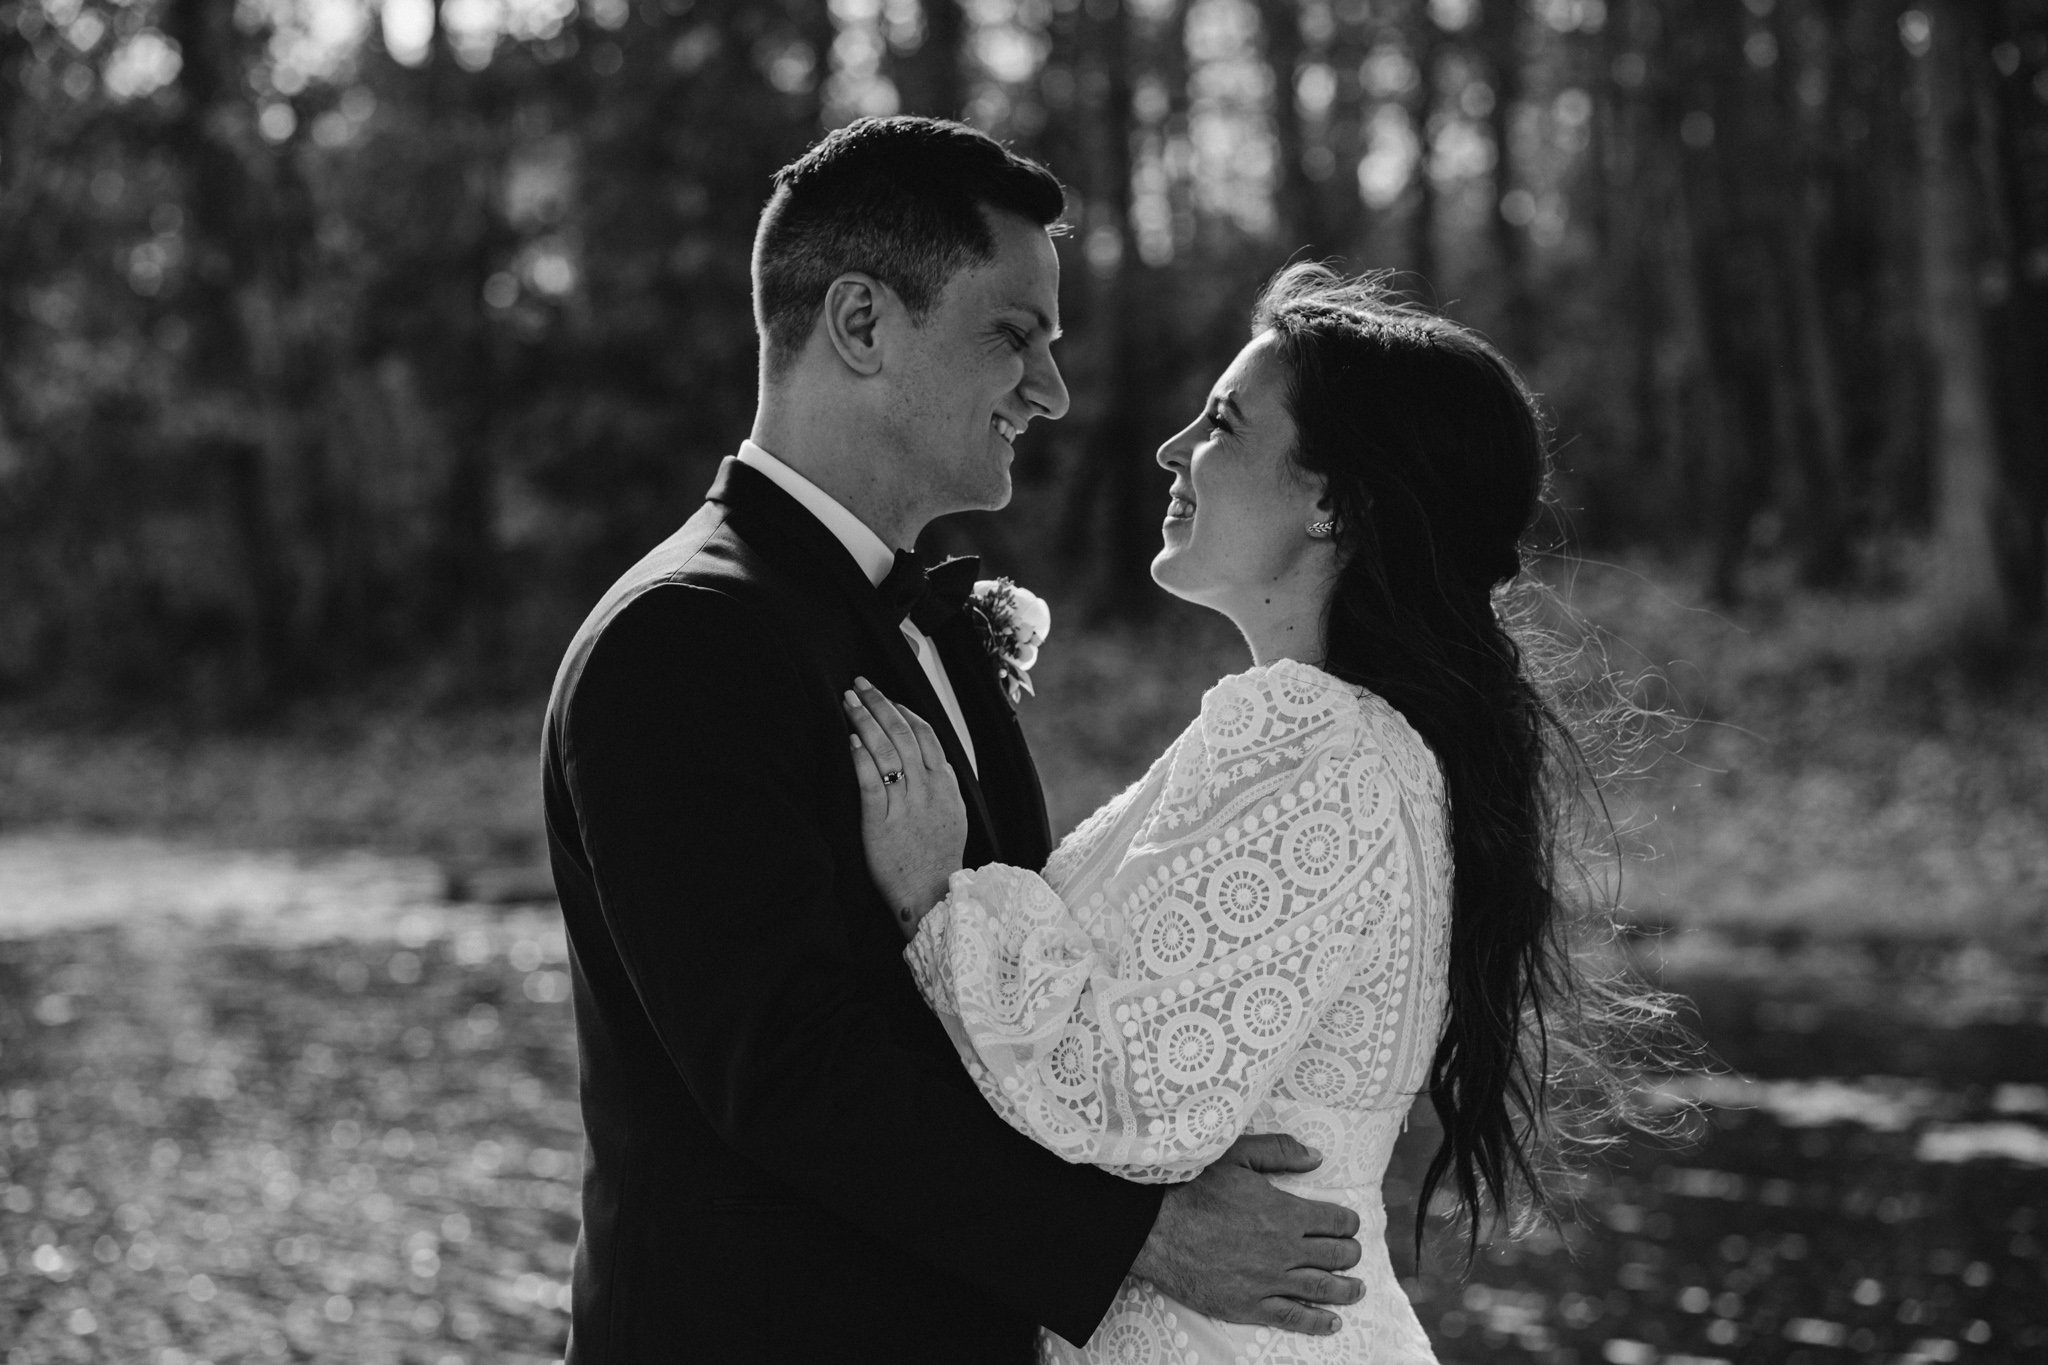 A couple on their wedding day in black and white.